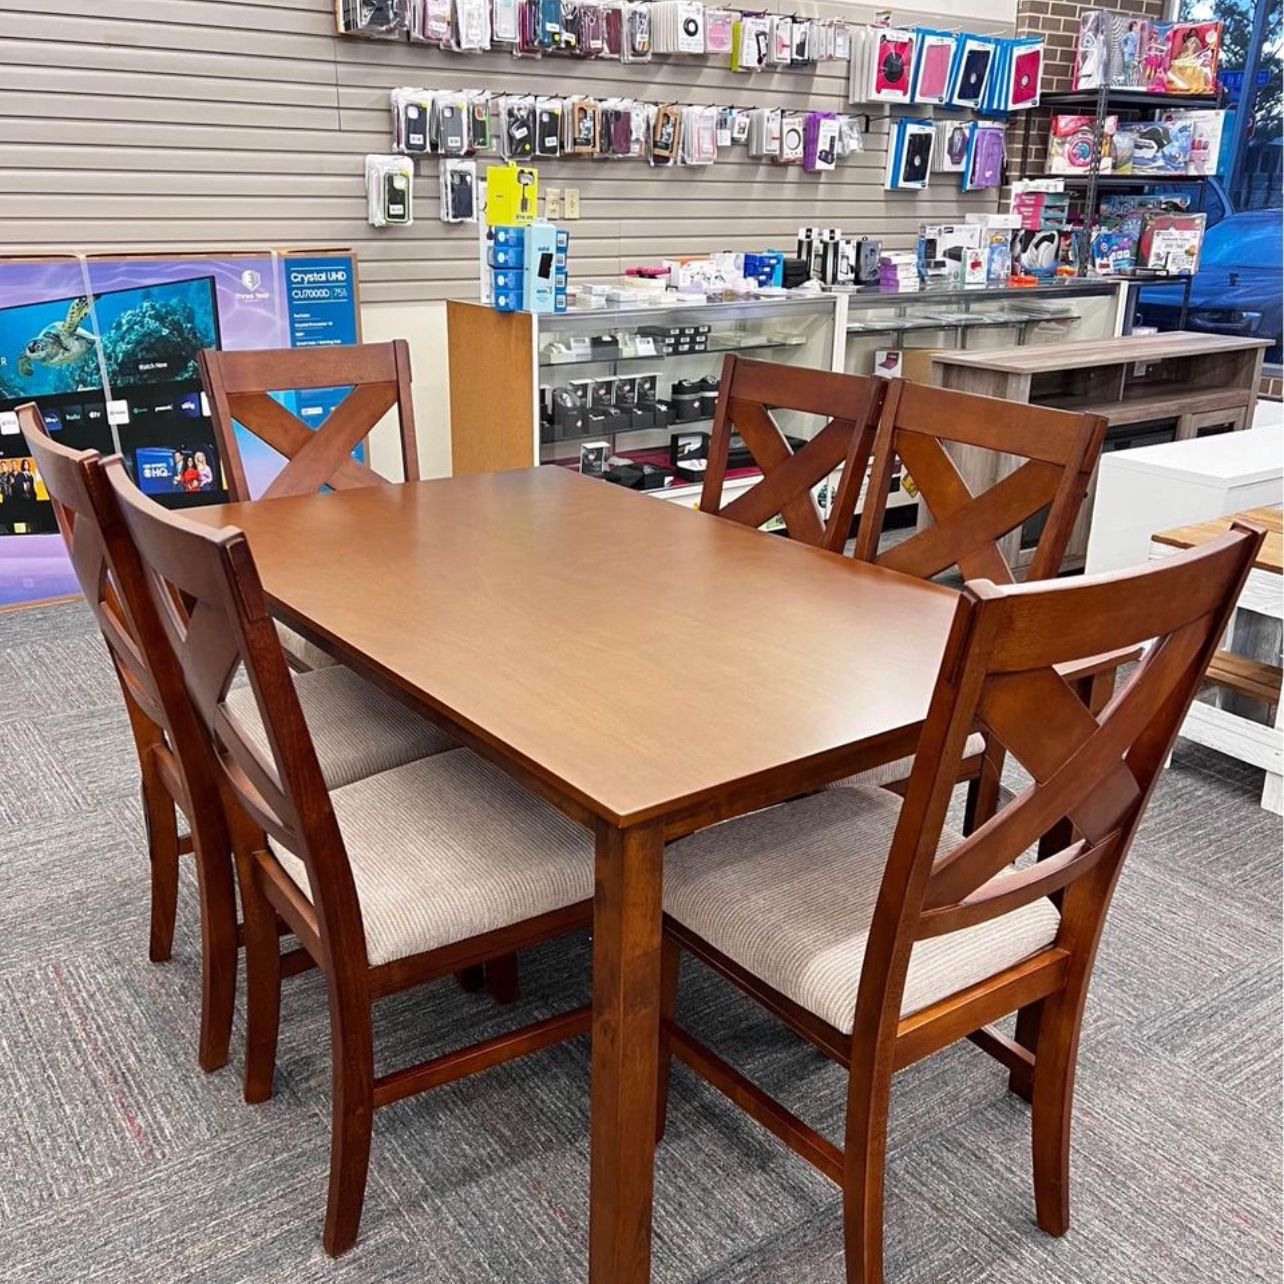 Modern Wood Walnut Brown Finished Dining Set, Take Now With Down Pay Biweekly, Monthly 💰